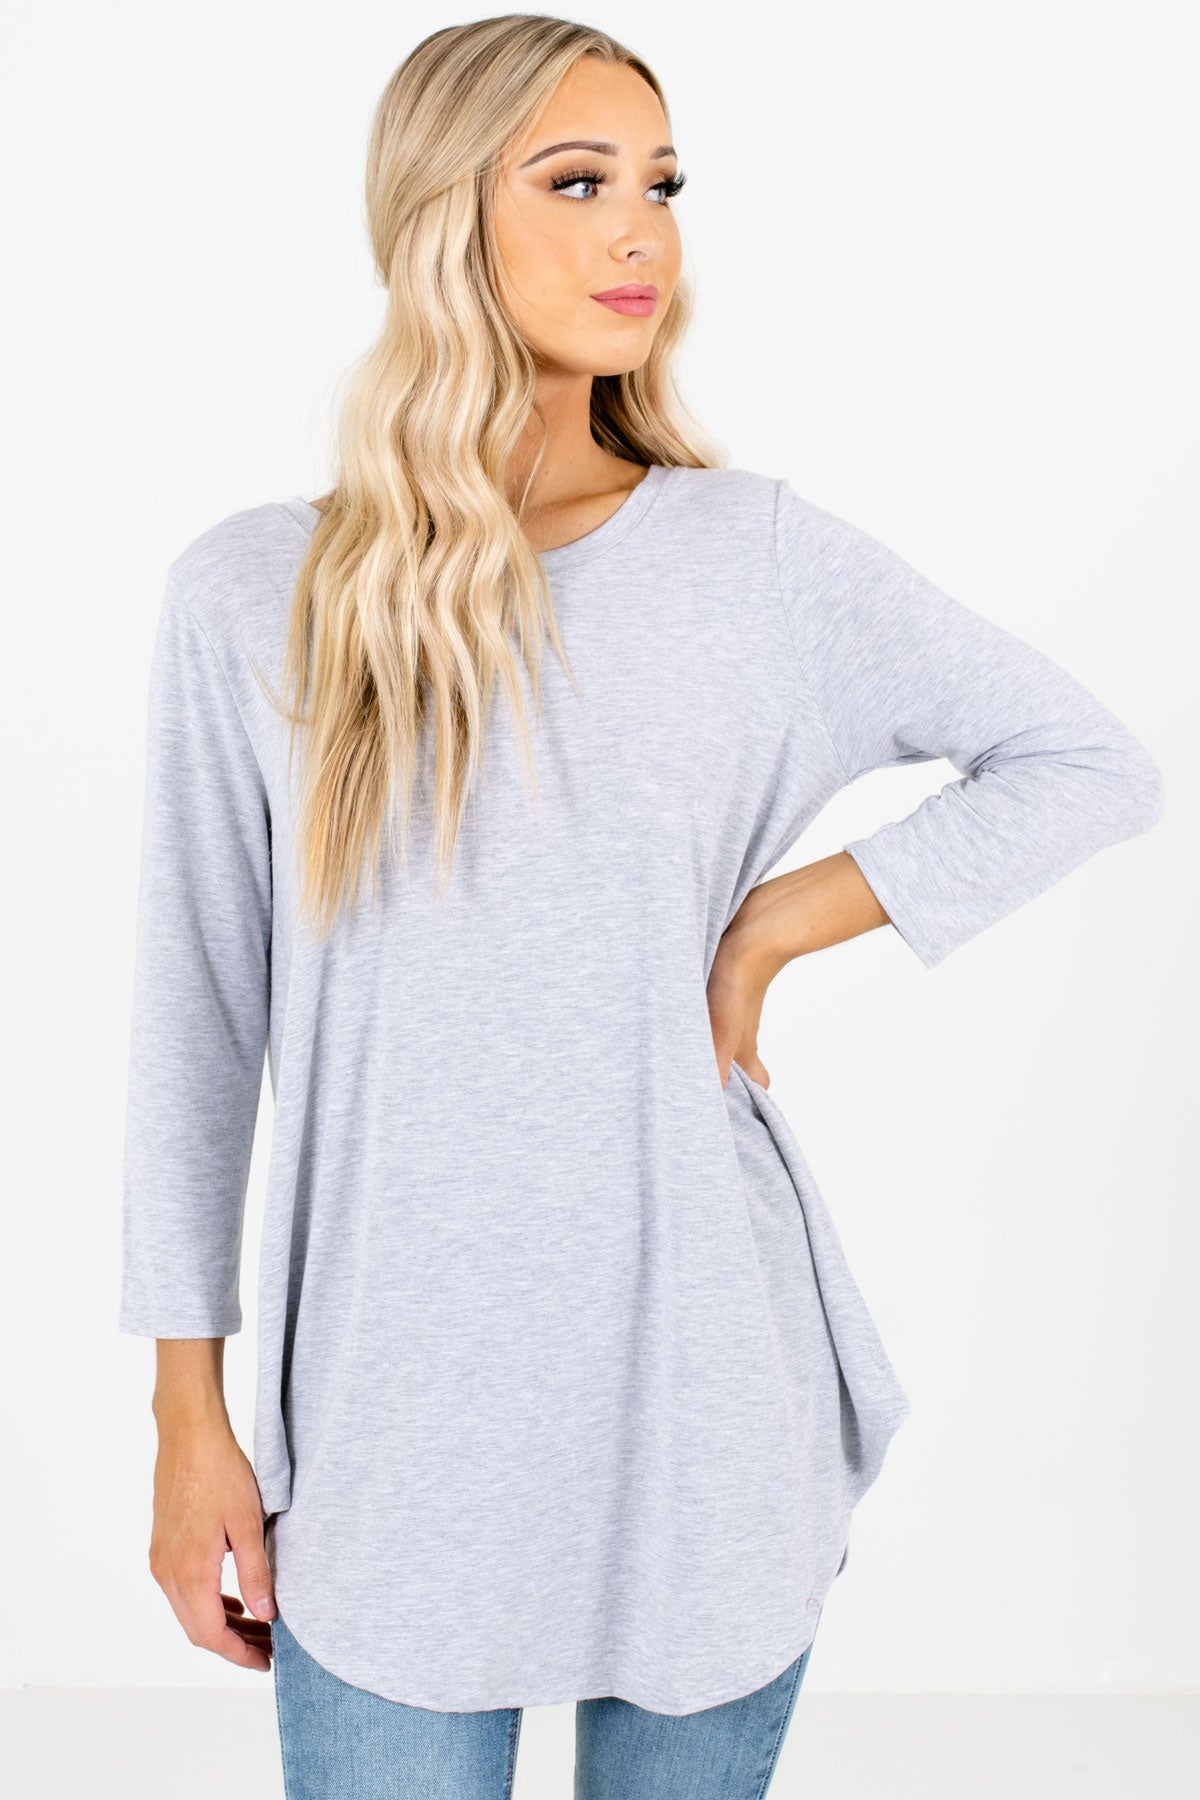 Women’s Heather Gray Fall and Winter Boutique Clothing